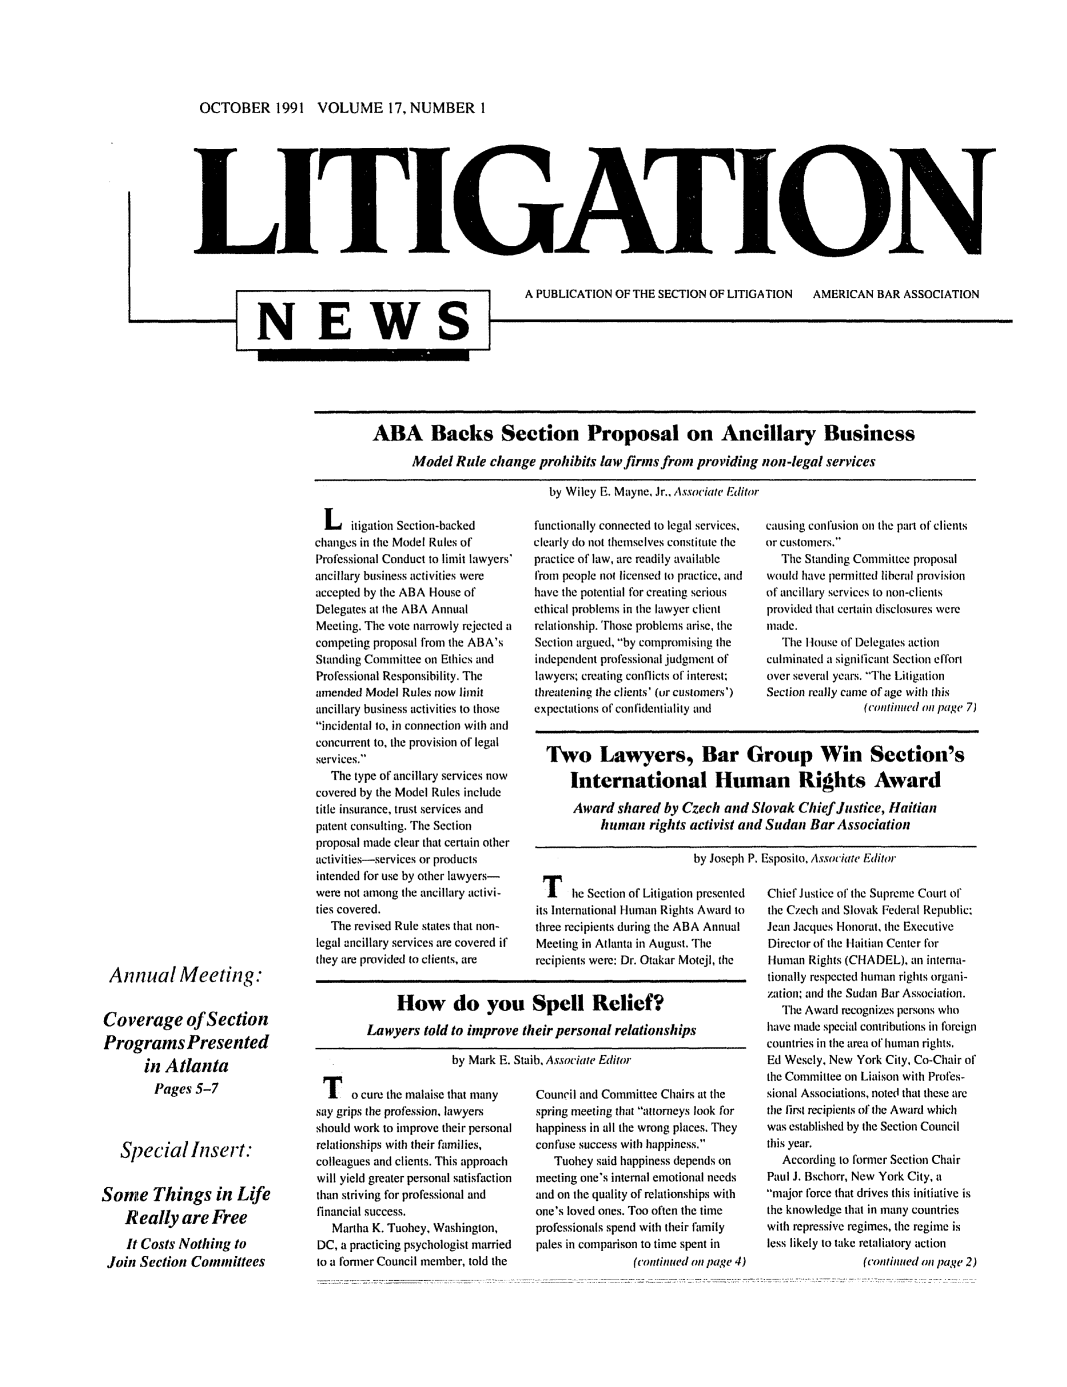 handle is hein.journals/lignws17 and id is 1 raw text is: OCTOBER 1991 VOLUME 17, NUMBER ILITNEWSATINI   A PUBLICATION OF THE SECTION OF LITIGATION  AMERICAN BAR ASSOCIATIONABA Backs Section Proposal on Ancillary BusinessModel Rule change prohibits lawfirmsfron providing non-legal servicesby Wiley E. Mayne. Jr., Assoc iate EditorAnnual Meeting:Coverage of SectionPrograms Presentedin AtlantaPages 5-7Special Insert:Some Things in LifeReally are FreeIt Costs Nothing toJoin Section ComnmnitteesL itigation Section-backedchanges in the Model Rules ofProfessional Conduct to limit lawyers'ancillary business activities wereaccepted by the ABA House ofDelegates at the ABA AnnualMeeting. The vote narrowly rejected acompeting proposal from the ABA'sStanding Committee on Ethics andProfessional Responsibility. Theamended Model Rules now limitancillary business activities to thoseincidental to, in connection with andconcurrent to, the provision of legalservices.The type of ancillary services nowcovered by the Model Rules includetitle insurance, trust services andpatent consulting. The Sectionproposal made clear that certain otheractivities-services or productsintended for use by other lawyers-were not among the ancillary activi-ties covered.The revised Rule states that non-legal ancillary services are covered ifthey are provided to clients, arefunctionally connected to legal services,clearly do not themselves constitute thepractice of law, arc readily availablefrom people not licensed to practice, andhave the potential for creating seriousethical problems in the lawyer clientrelationship. Those problems arise, theSection argued, by compromising theindependent professional judgment oflawyers, creating conflicts of interest;threatening the clients' (or customers')expectations of confidentiality andcausing confusion oil the part of clientsor customers.The Standing Committee proposalwould have pernlitted liberal provisionof ancillary services to non-clientsprovided that certain disclosures weremade.'rile I louse of Delegates actionculminaled a significant Section effortover several years. The LitigationSection really came of age wilh this(continued on page 7)Two Lawyers, Bar Group Win Section'sInternational Human Rights AwardAward shared by Czech and Slovak Chief Justice, Haitianhuman rights activist and Sudan Bar Associationby Joseph P. Esposito, Associate EditorT he Section of Litigation presentedits International Human Rights Award tothree recipients during tile ABA AnnualMeeting in Atlanta in August. Therecipients were: Dr. Otakar Motejl, tileHow do you Spell Relief?Lawyers told to improve their personal relationshipsby Mark E. Staib. Associate EditorT o cure the malaise that manysay grips the profession, lawyersshould work to improve their personalrelationships with their families,colleagues and clients. This approachwill yield greater personal satisfactionthan striving for professional andfinancial success.Martha K. Tuohey, Washinglon,DC, a practicing psychologist marriedto a foner Council member, told tileCouncil and Committee Chairs at thespring meeting that attorneys look forhappiness in all the wrong places. Theyconfuse success with happiness.Tuohey said happiness depends onmeeting one's internal emotional needsand on the quality of relationships withone's loved ones. Too often the timeprofessionals spend with their familypales in comparison to time spent in(continued on page 4)Chief Justice of the Supreme Court oftile Czech and Slovak Federal Republic;Jean Jacques -lonorat, tile ExecutiveDirector of the Haitian Center forHuman Rights (CHADEL), an intena-tionally respected human rights organi-zation and the Sudan Bar Association.The Award recognizes persons whohave made special contributions il foreigncountries in the area of human rights.Ed Wesely, New York City, Co-Chair oftile Committee on Liaison with Profes-sional Associations, noted that these arethe first recipients of the Award whichwas established by tle Section Councilthis year.According to foniler Section ChairPaul J. Bsciorr, New York City, amajor force that drives this initiative isthe knowledge that in many countrieswith repressive regimes, the regime isless likely to take retaliatory action(contiuicd o(11 page 2)